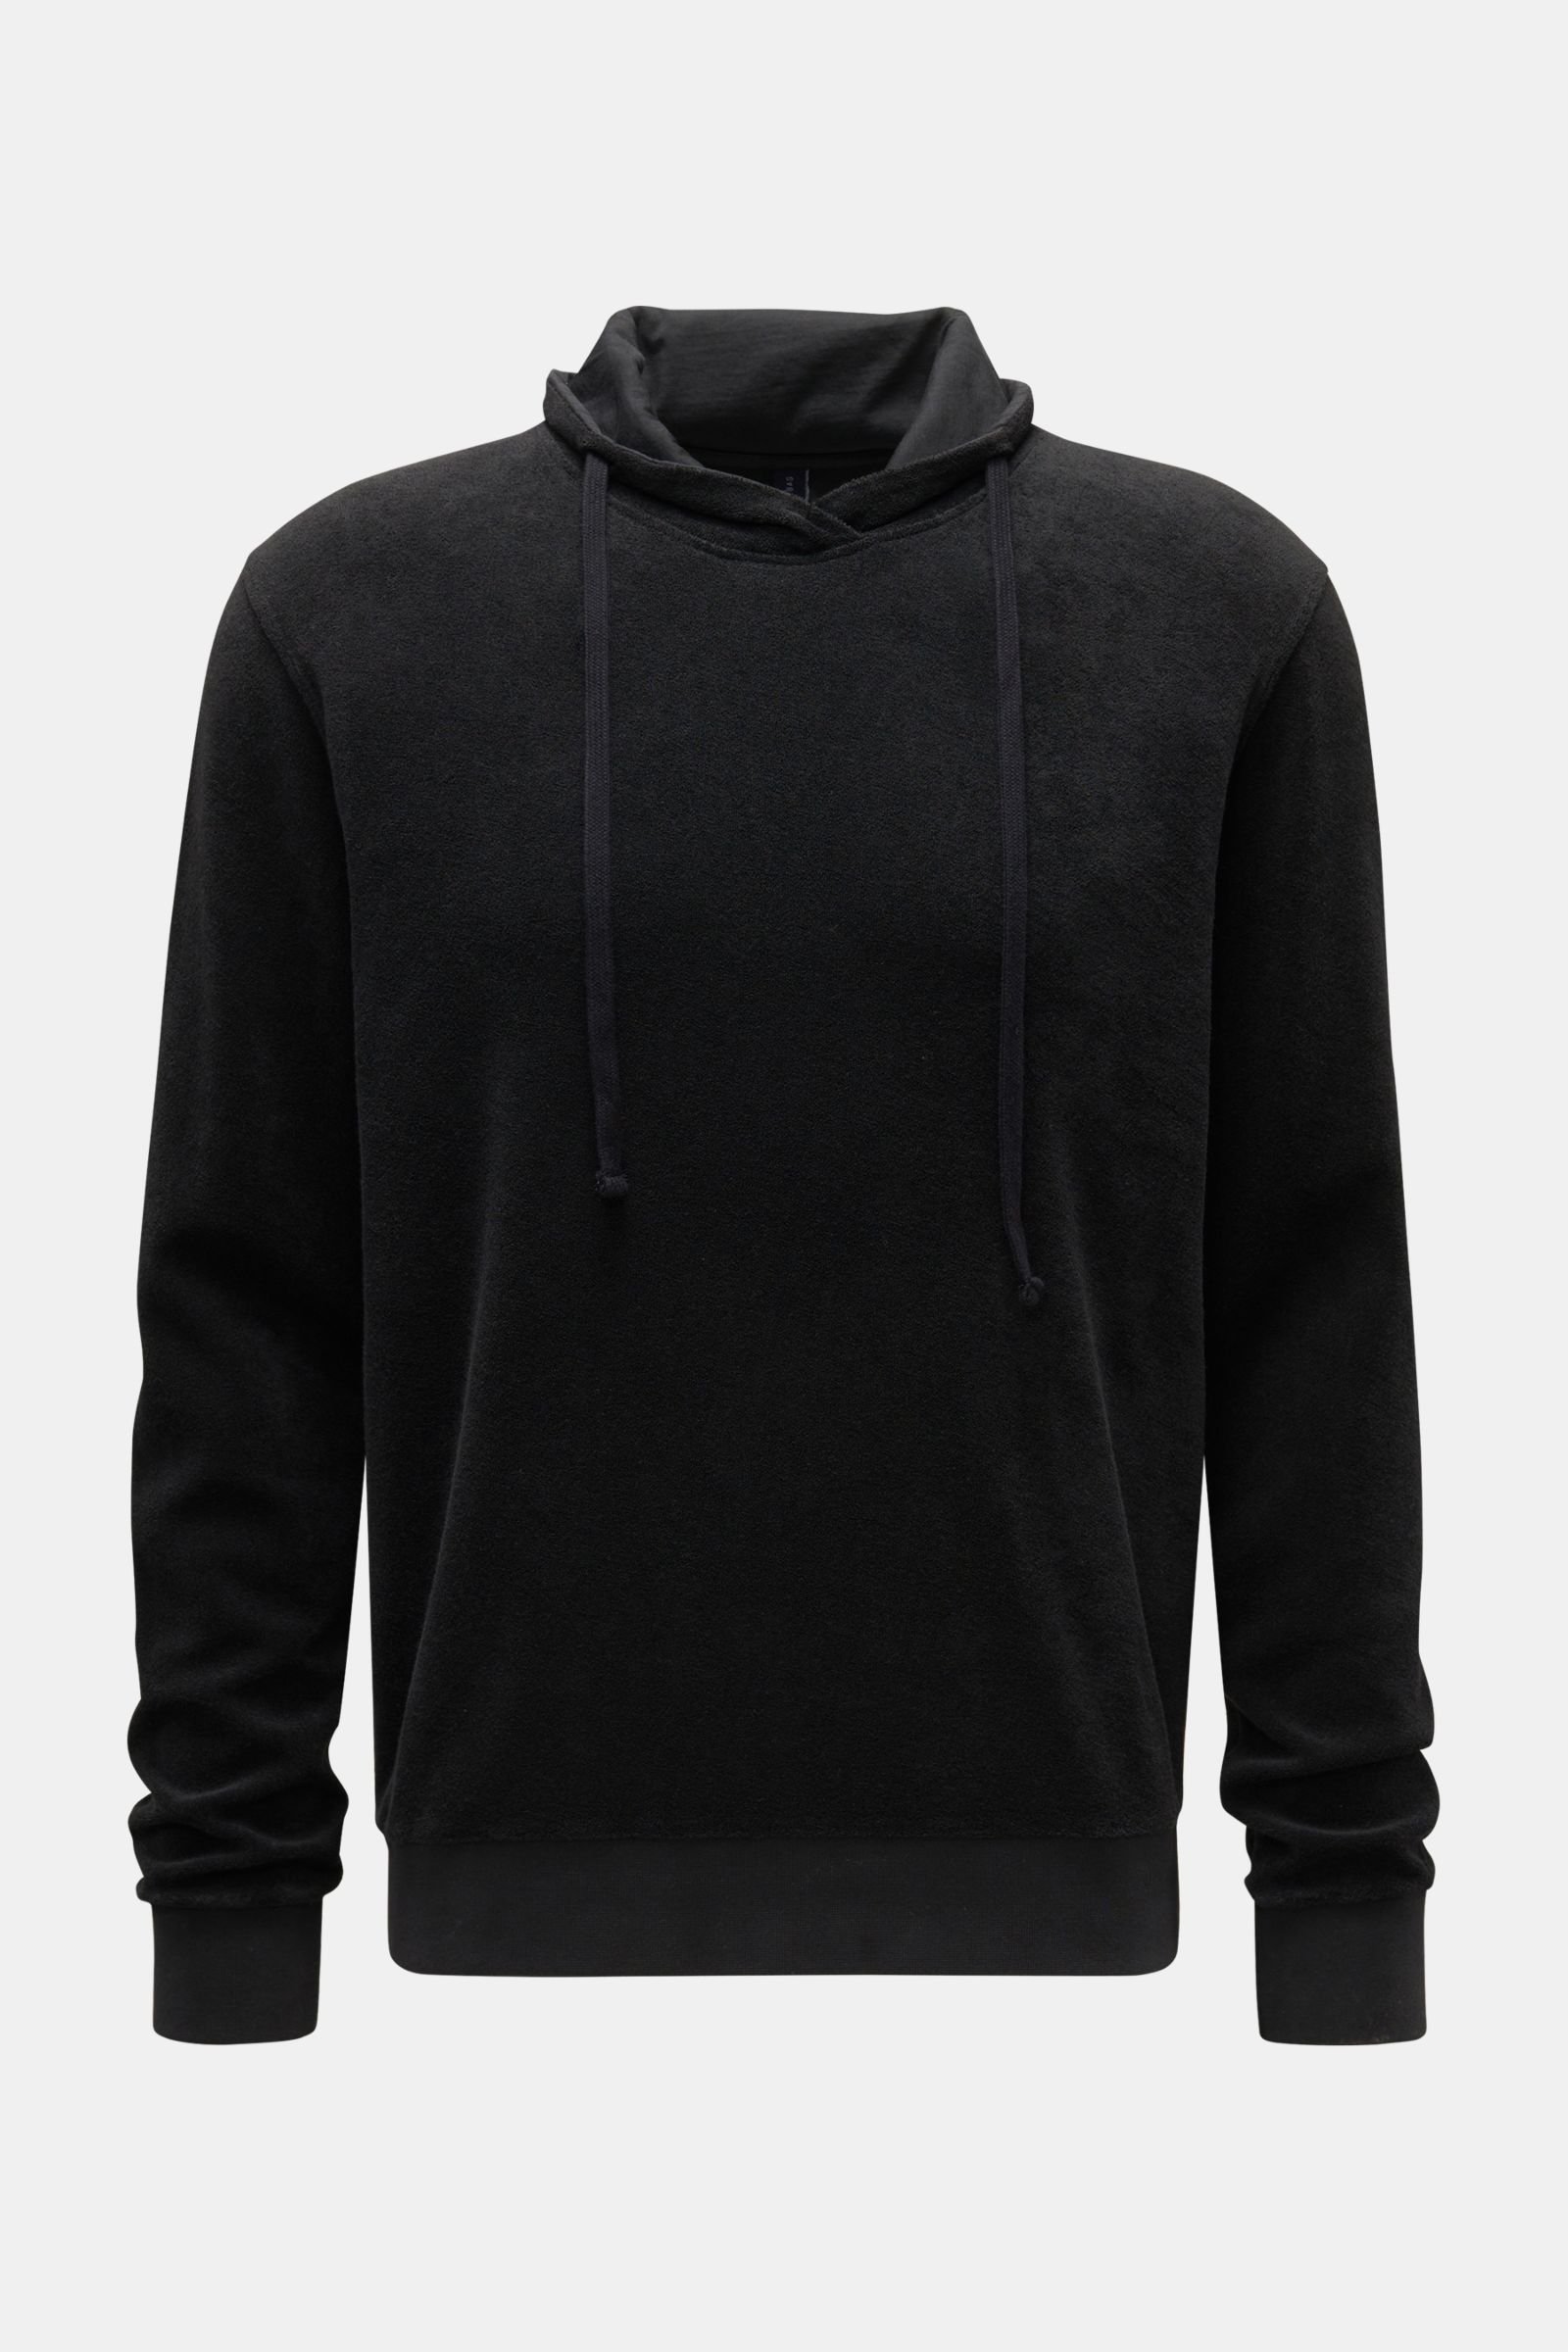 Terry jumper 'Terry Turtle' black